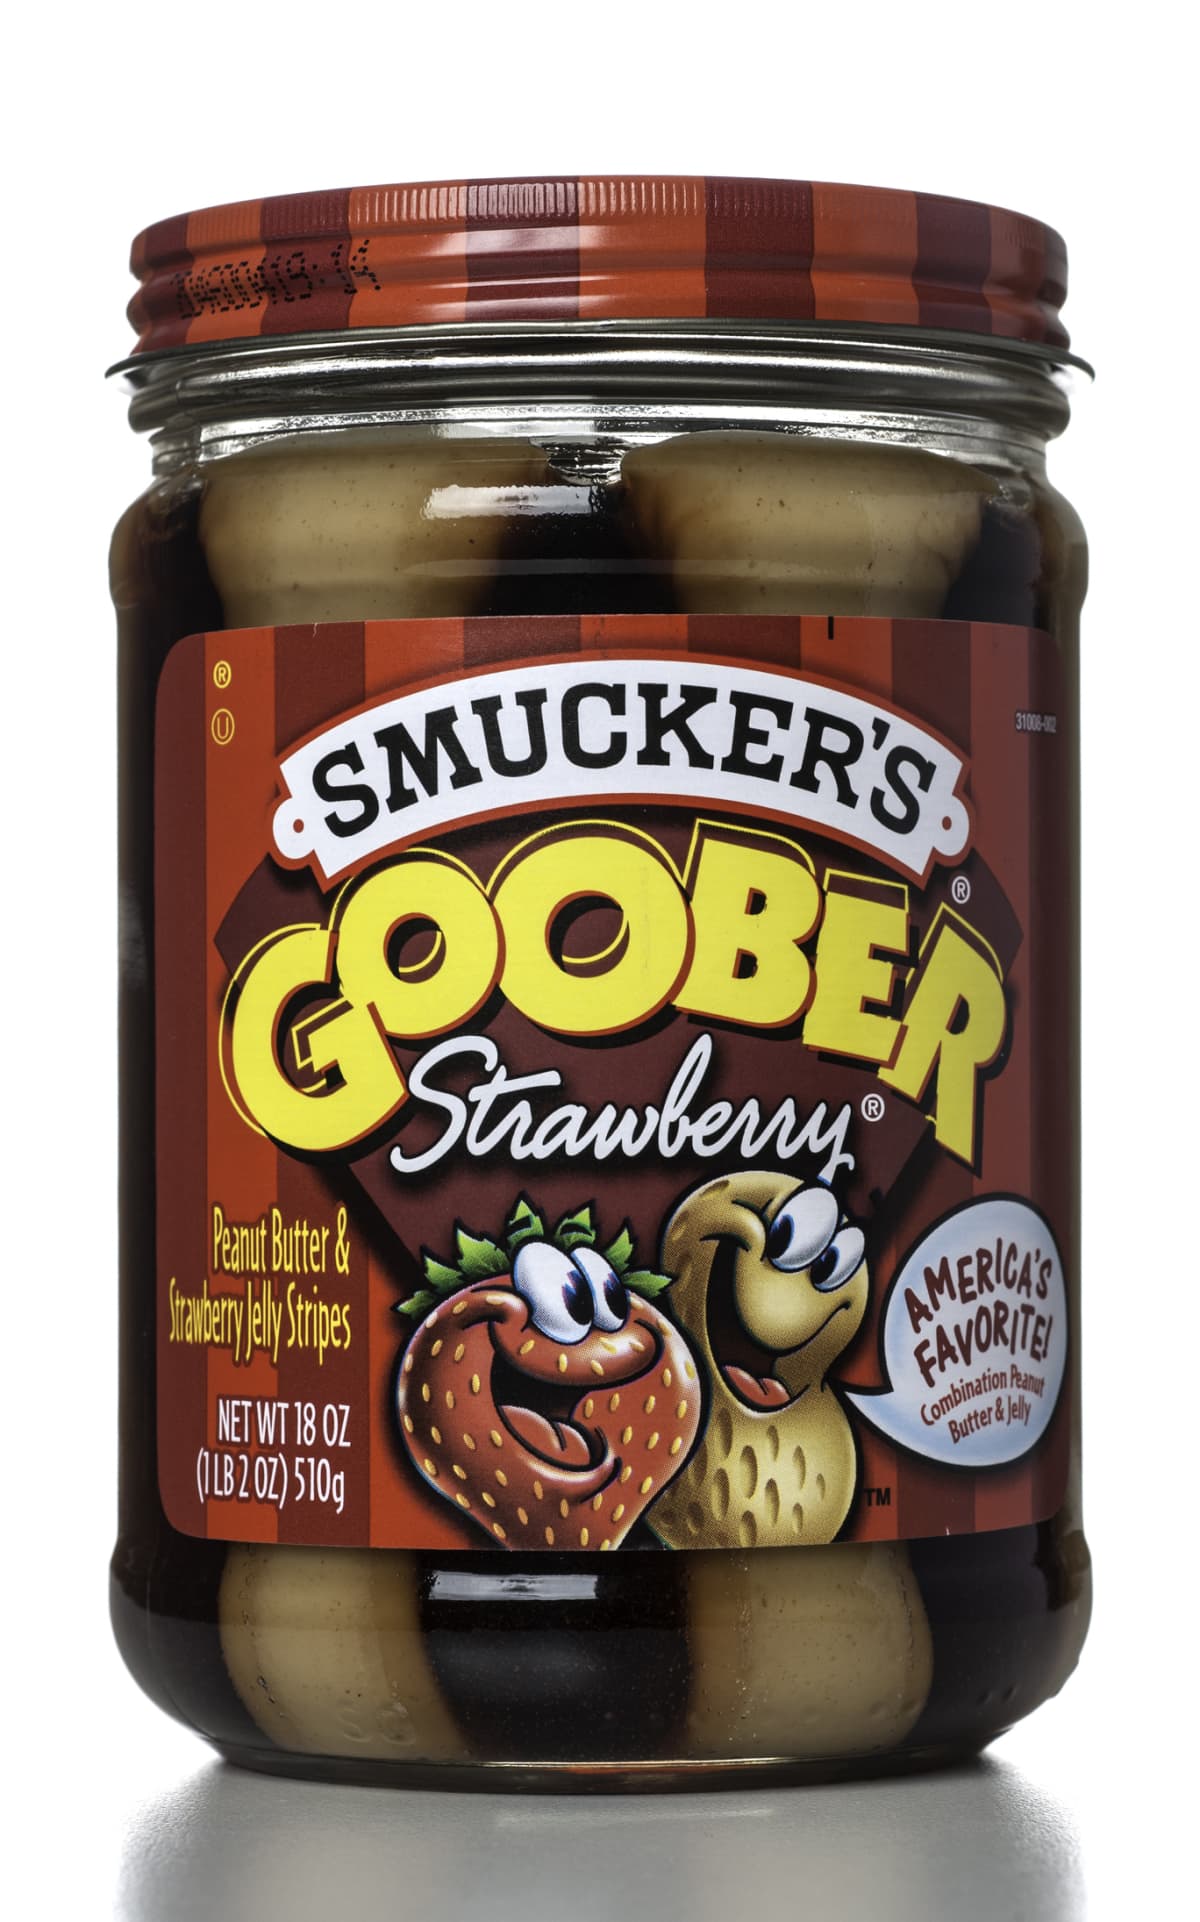 "Miami, USA - May 20, 2012: Smucker's Goober Strawberry Peanut Butter & Jelly 18 OZ jar. Smucker's brand is owned by J. M. Smucker Co."